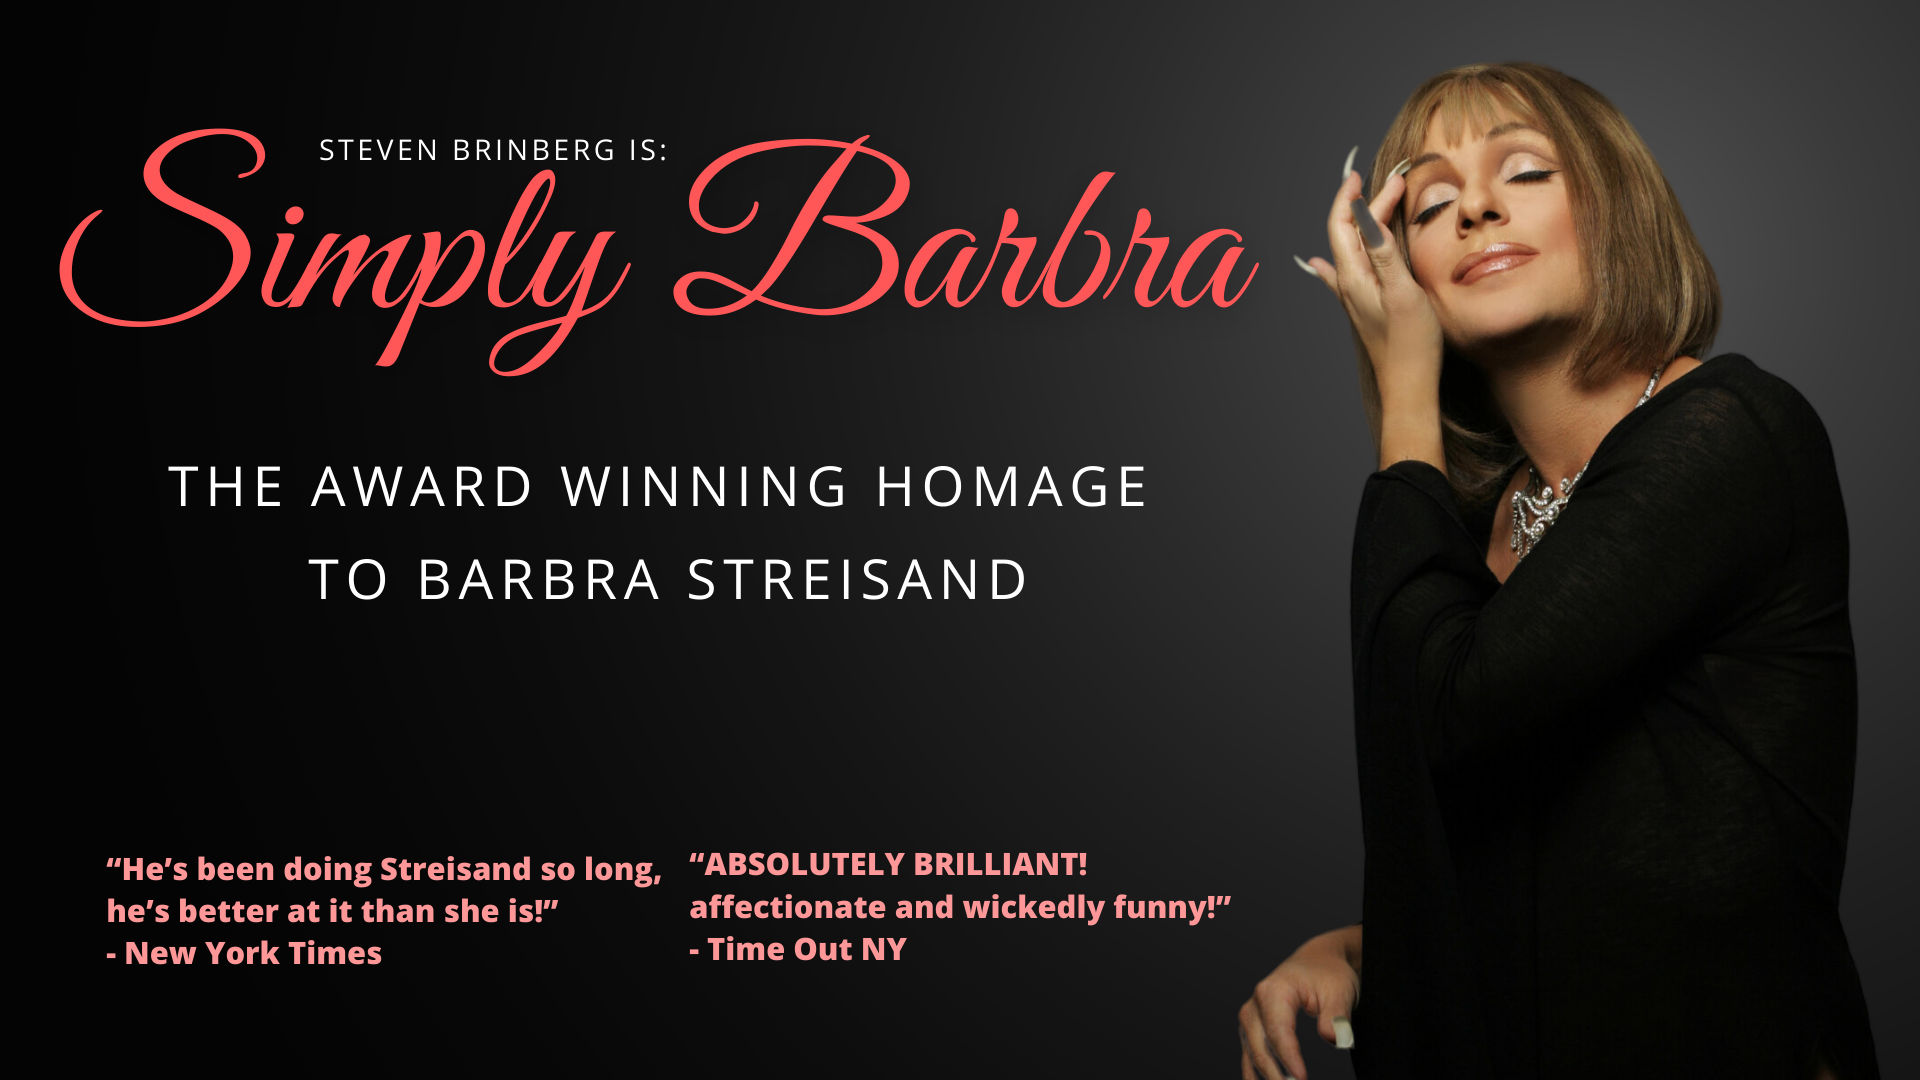 Image representing Simply Barbra - Steven Brinberg writes and stars as Simply Barbra from The Astor Theatre